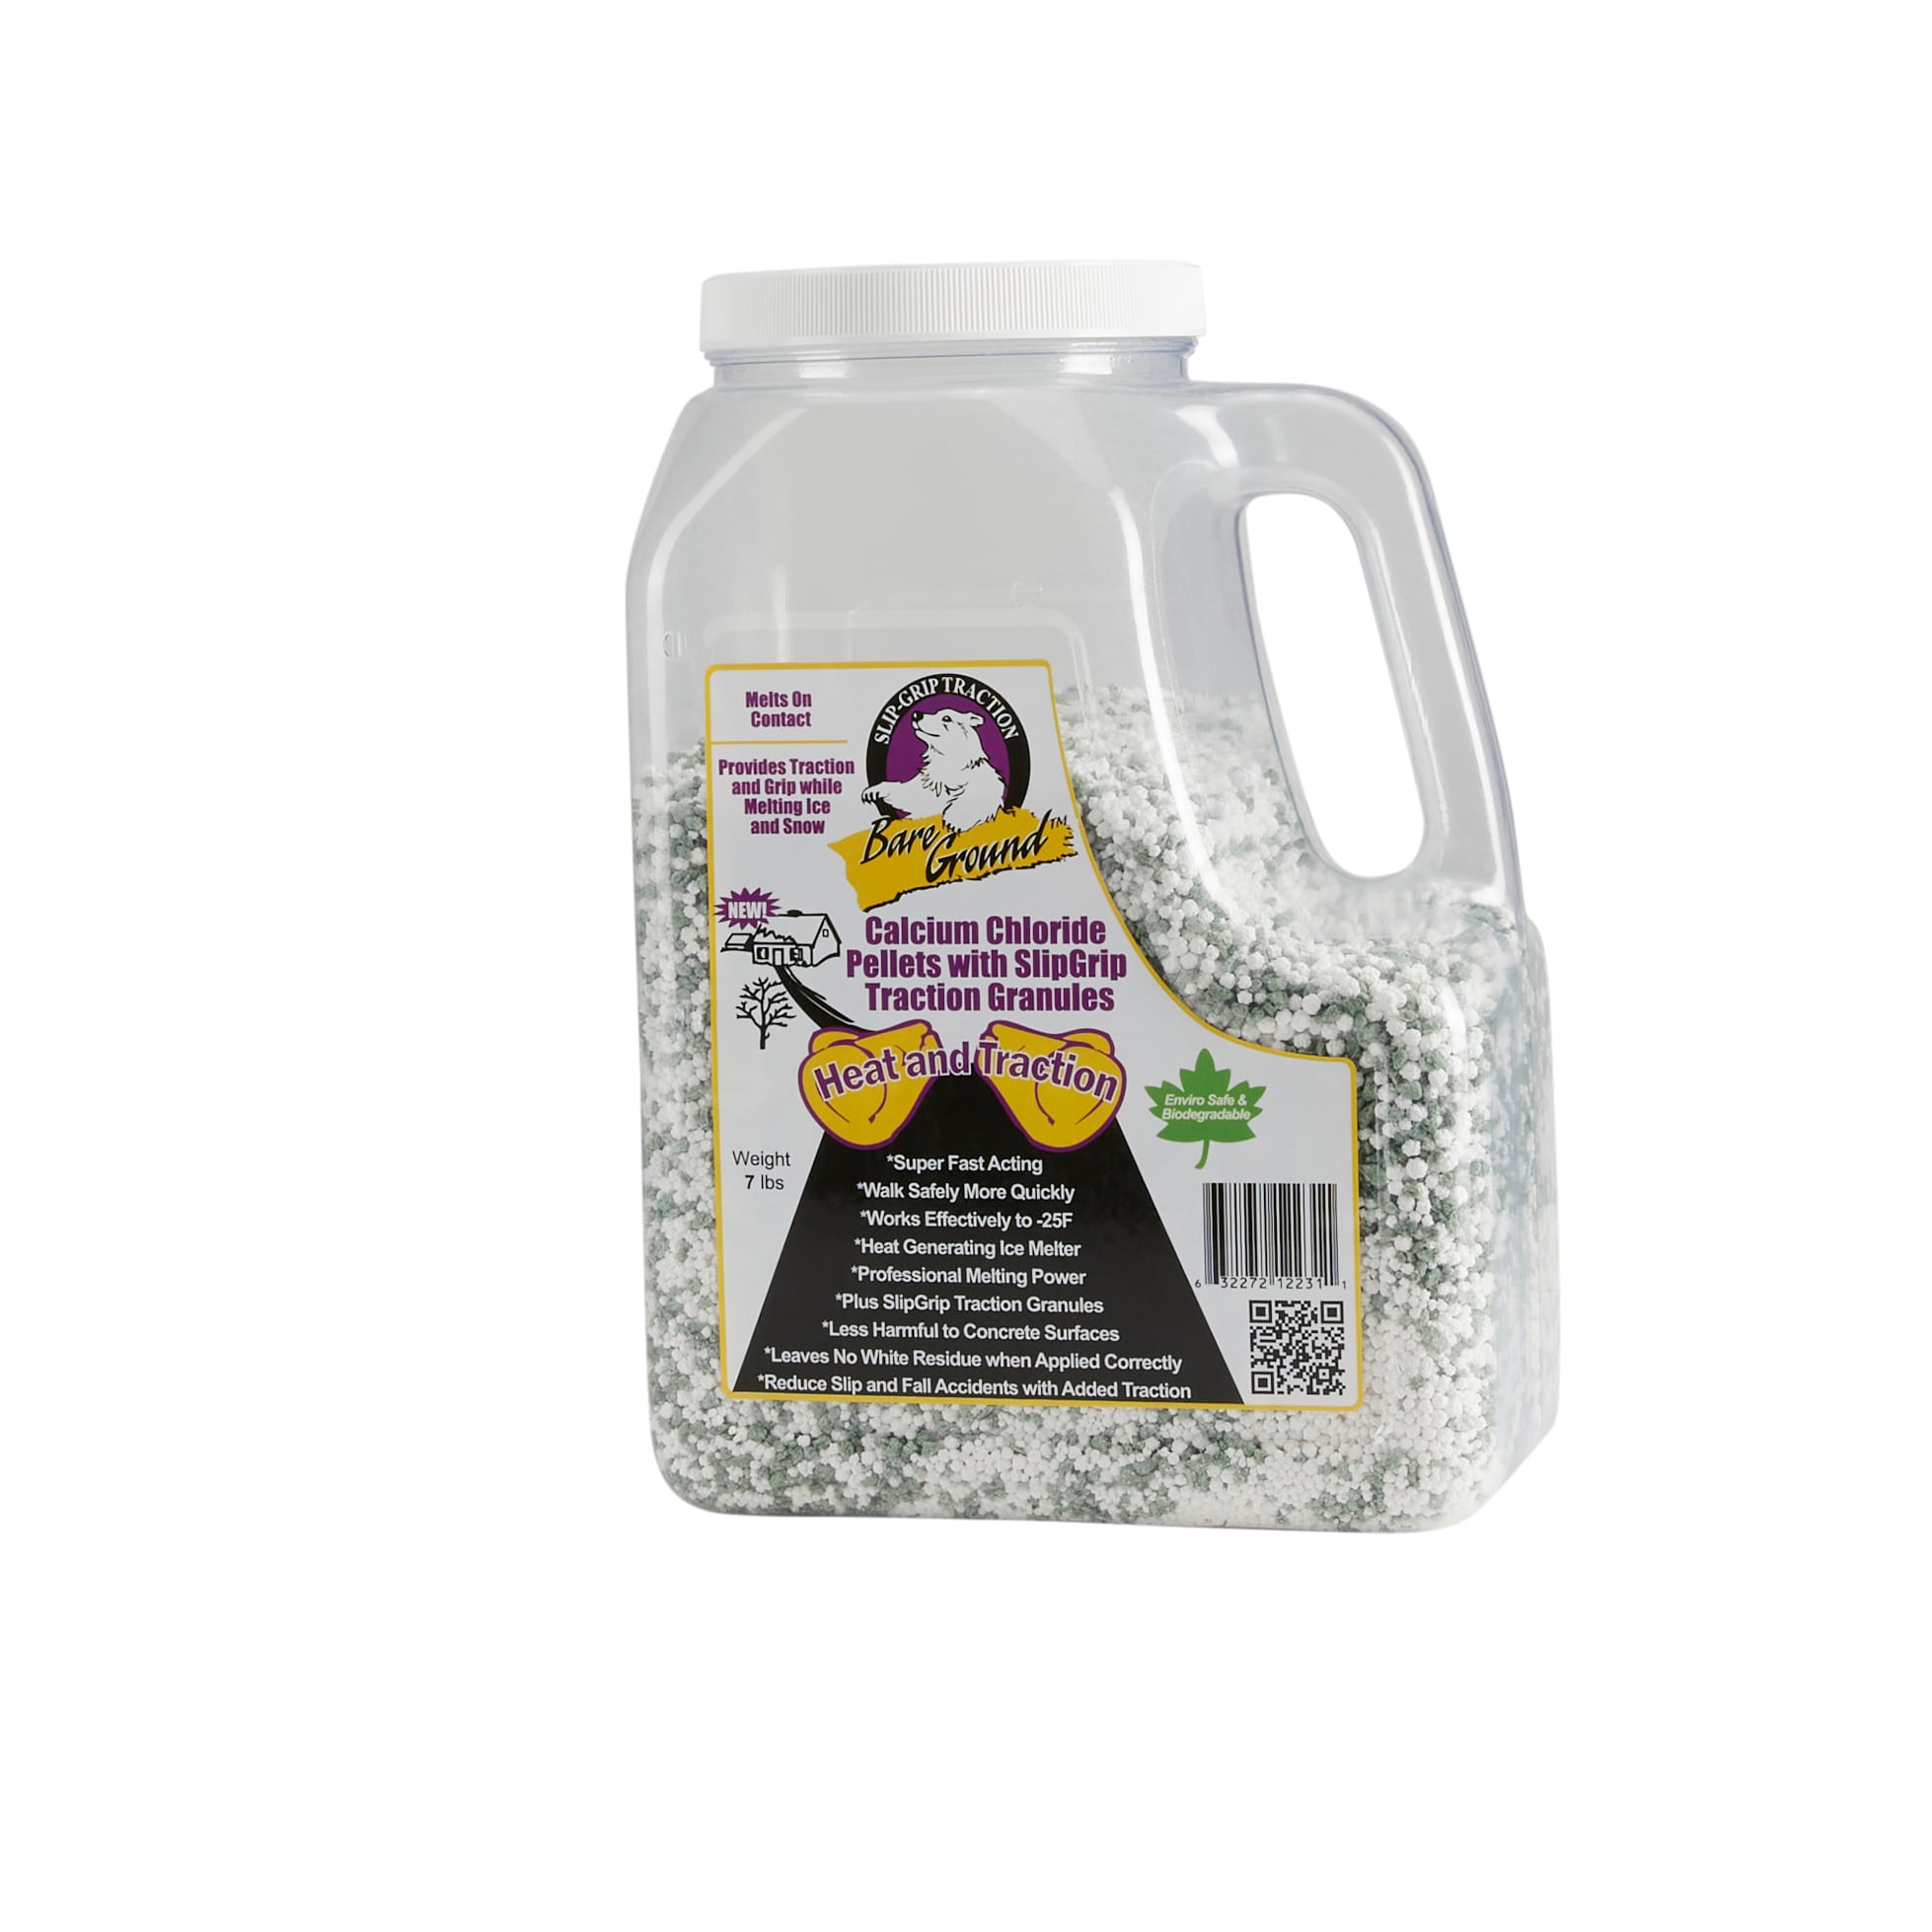 BareGround 12lb shaker jug TriBlend w/ Calcium Pellets Melts in lowest temps 